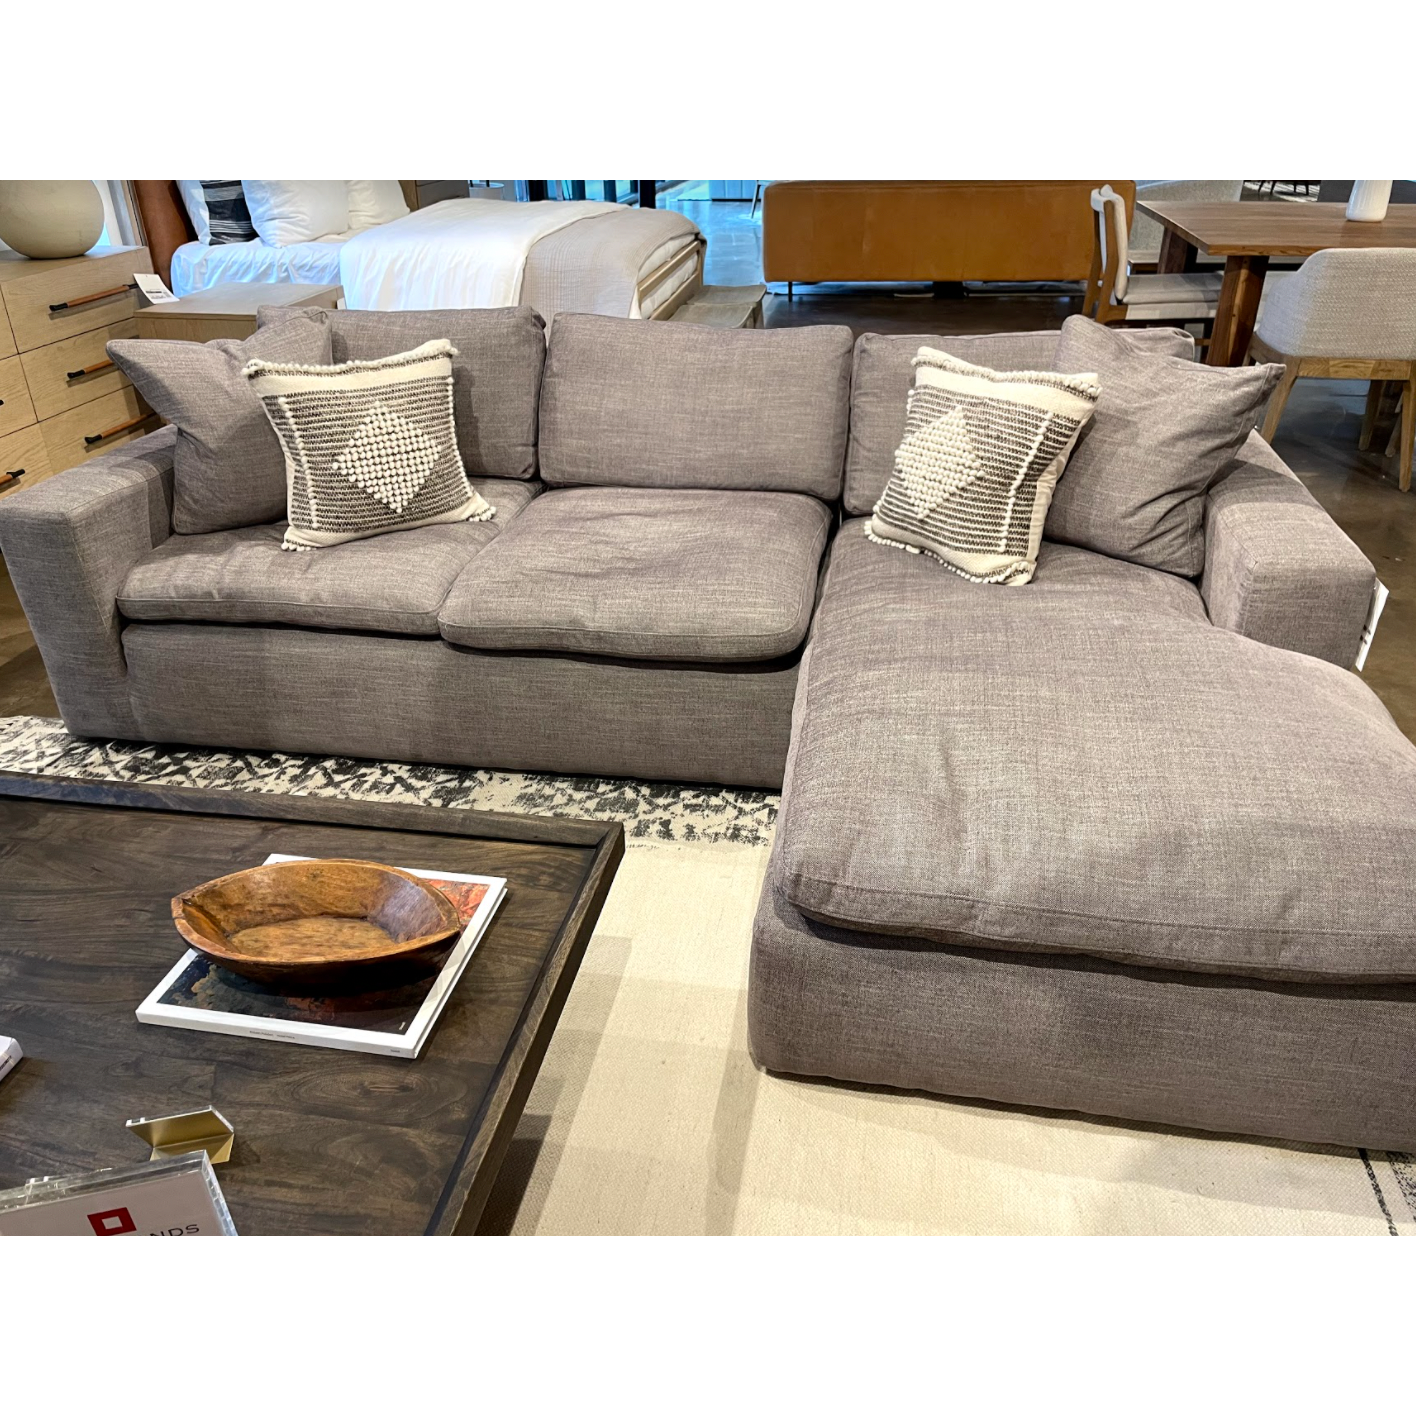 This Plume 2 Piece 136" Sectional - Harbor Grey is oversized and billowy for ultimate comfort, with block arms squaring off sink-in seating and ample feather-and-down cushioning. Perfect for movie nights and gathering the whole family around for years to come.   Overall Dimensions: 136.50"w x 70.00"d x 33.50"h